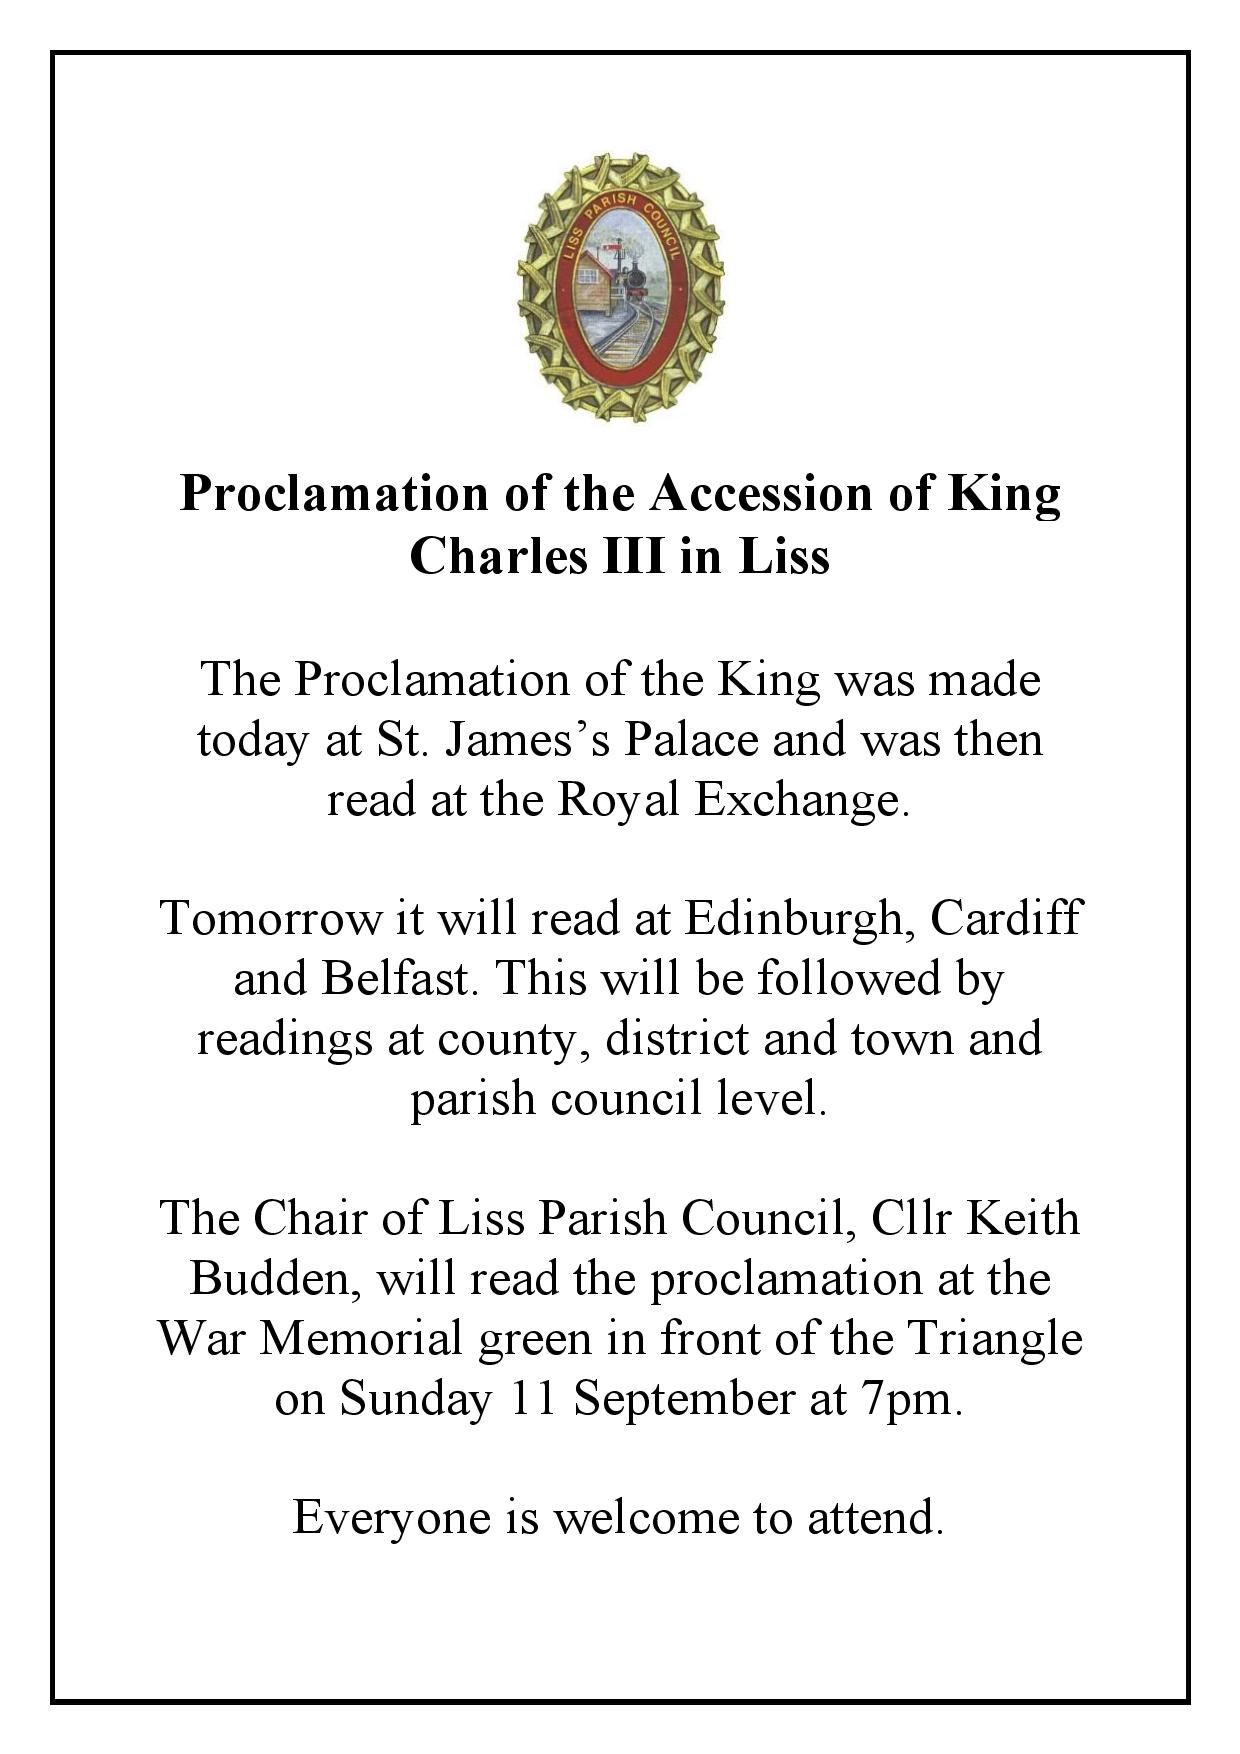 Proclamation of the King in Liss